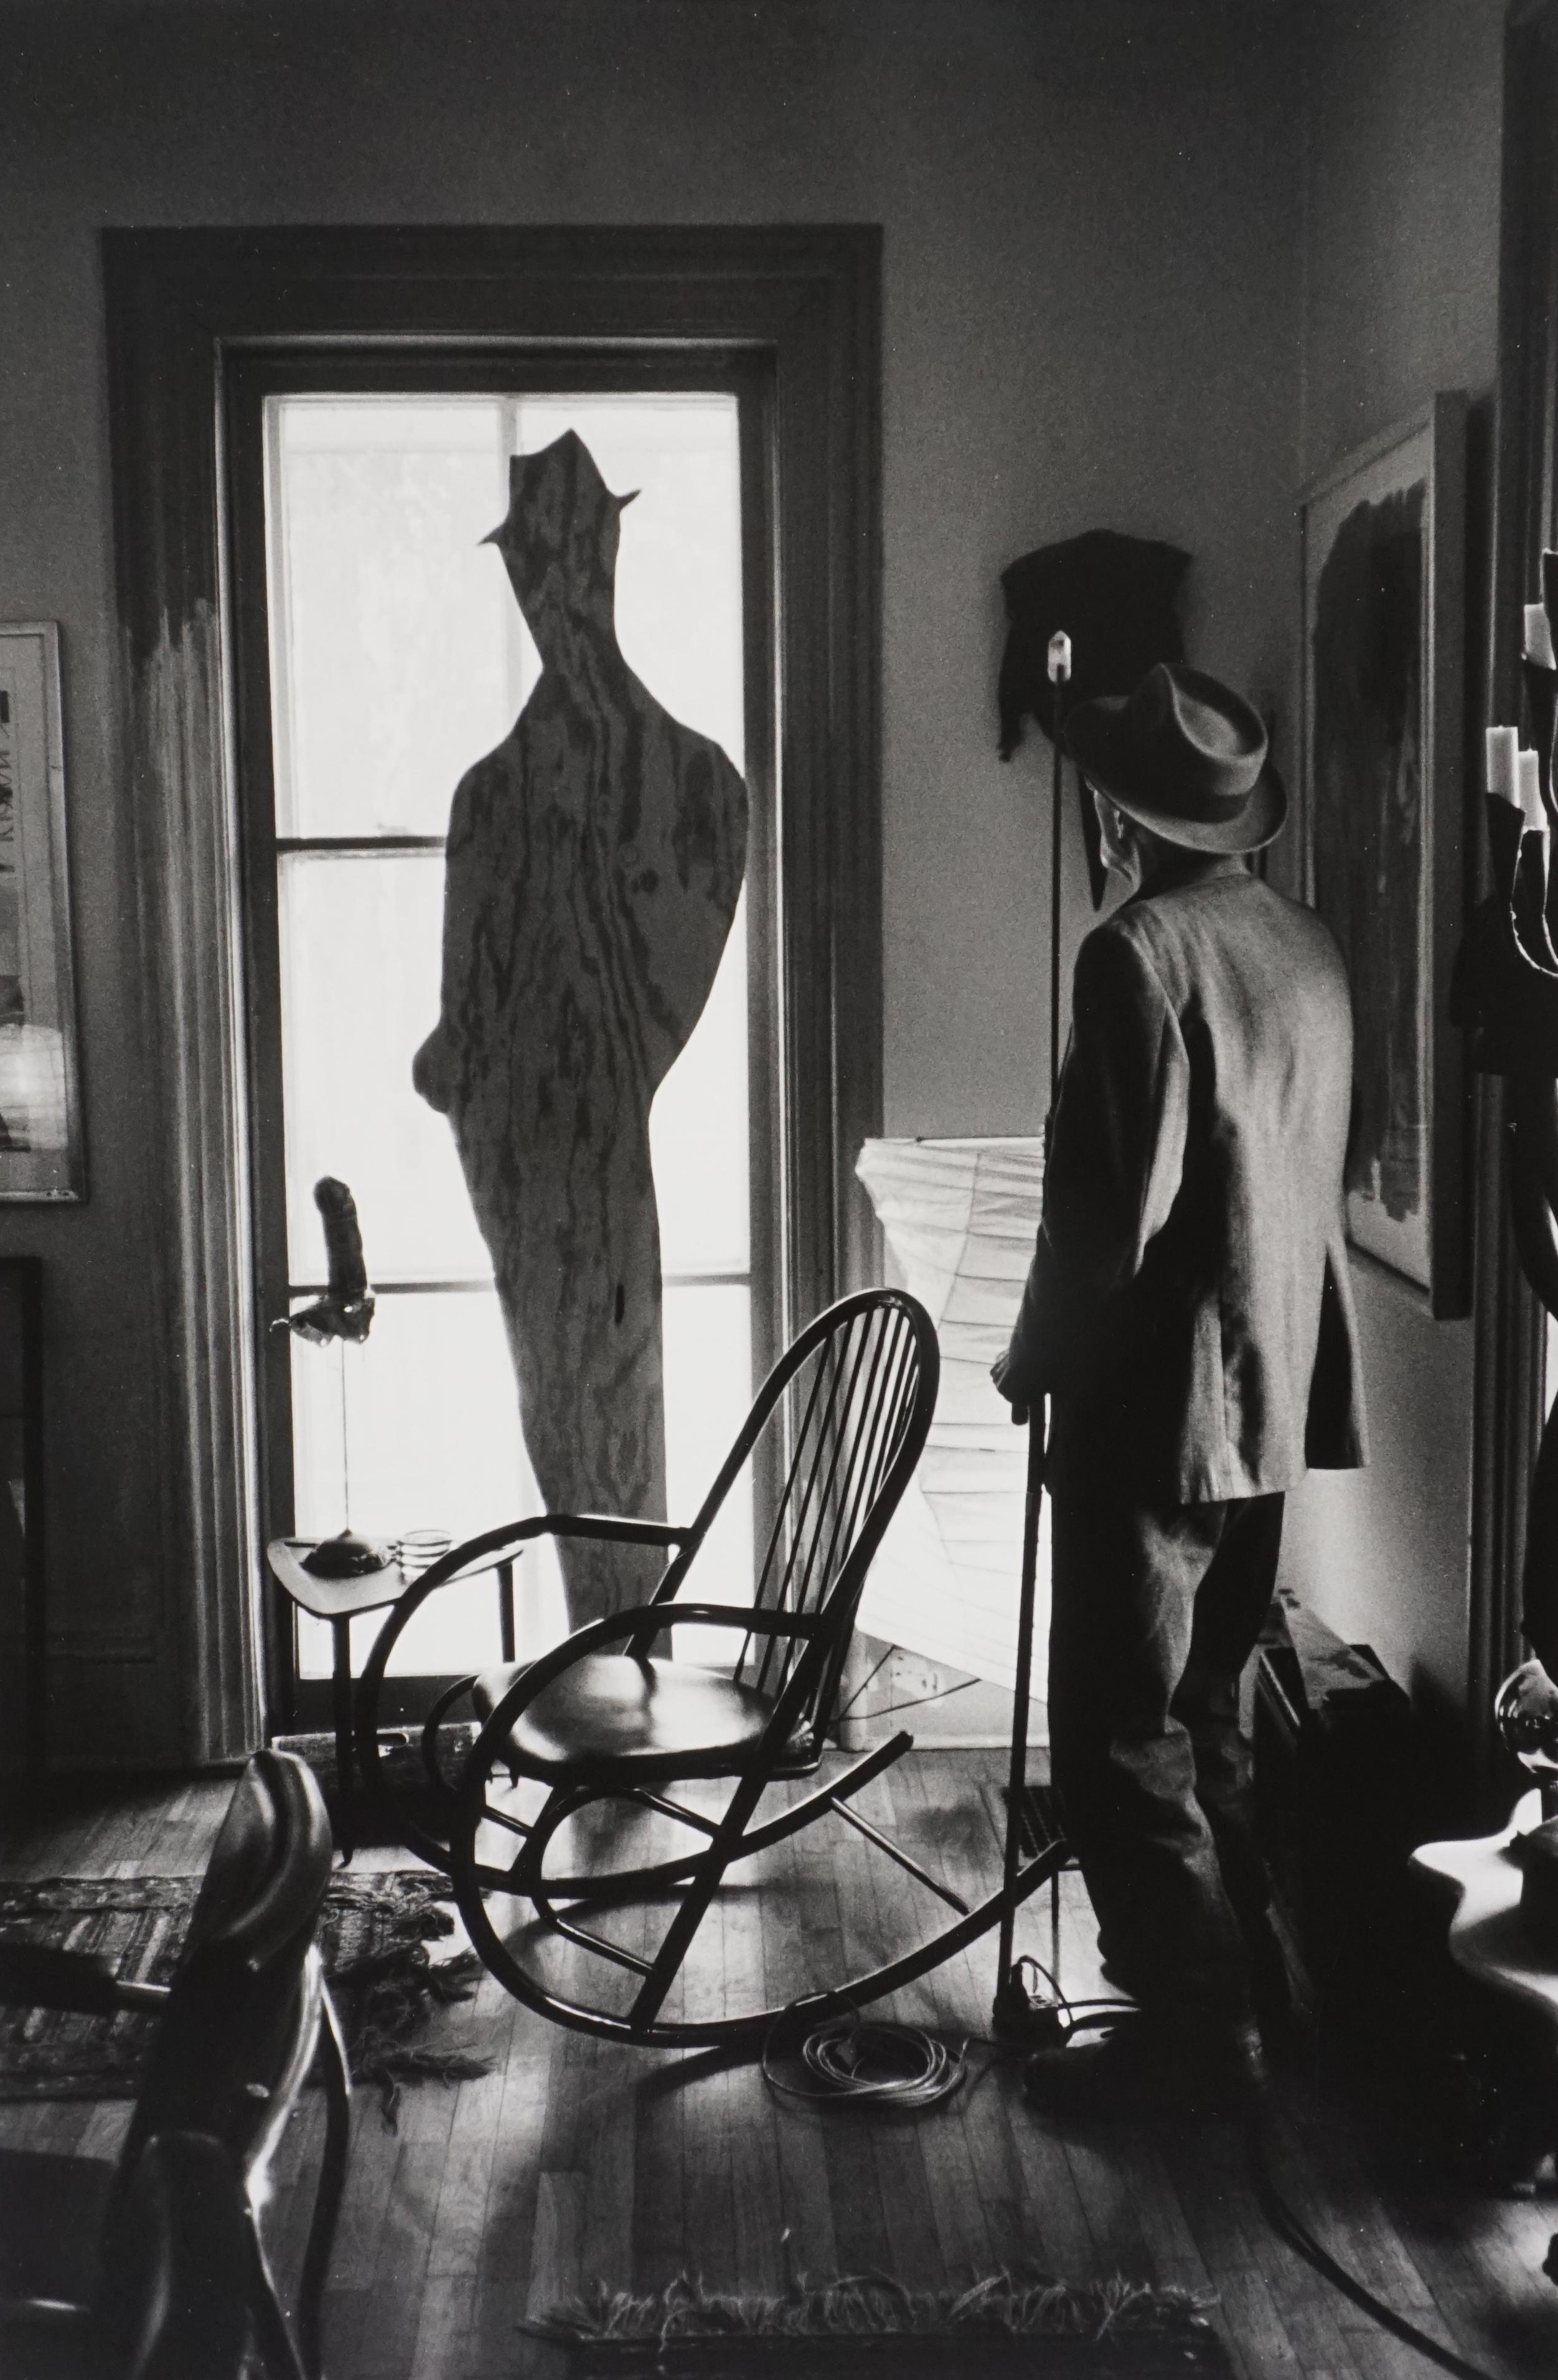 Allen Ginsberg Black and White Photograph - W. Burroughs Looking at Cutouts, 1995